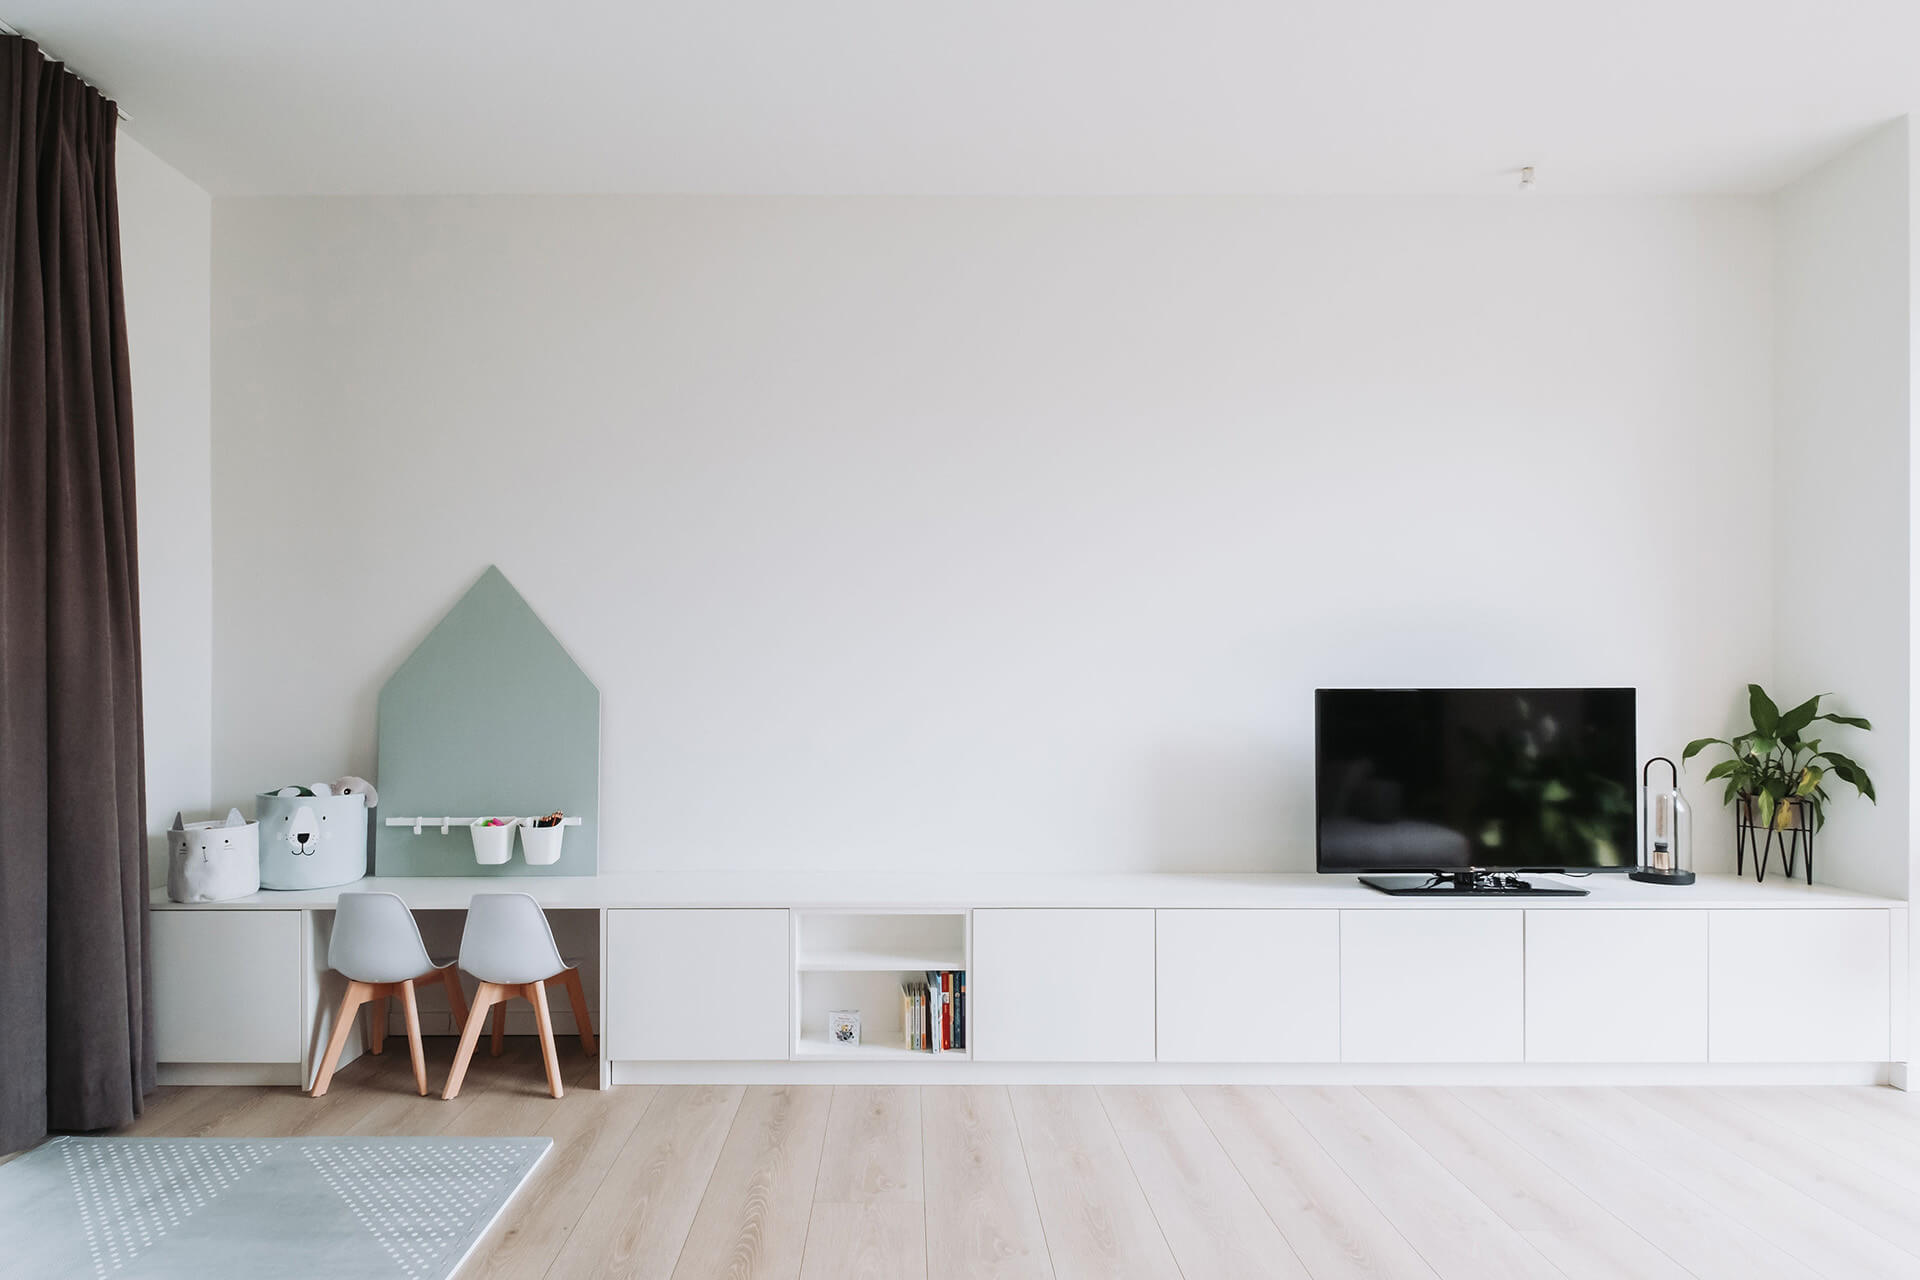 Long and wide custom-made TV cabinet in white front with self-opening doors, from maatkastenonline